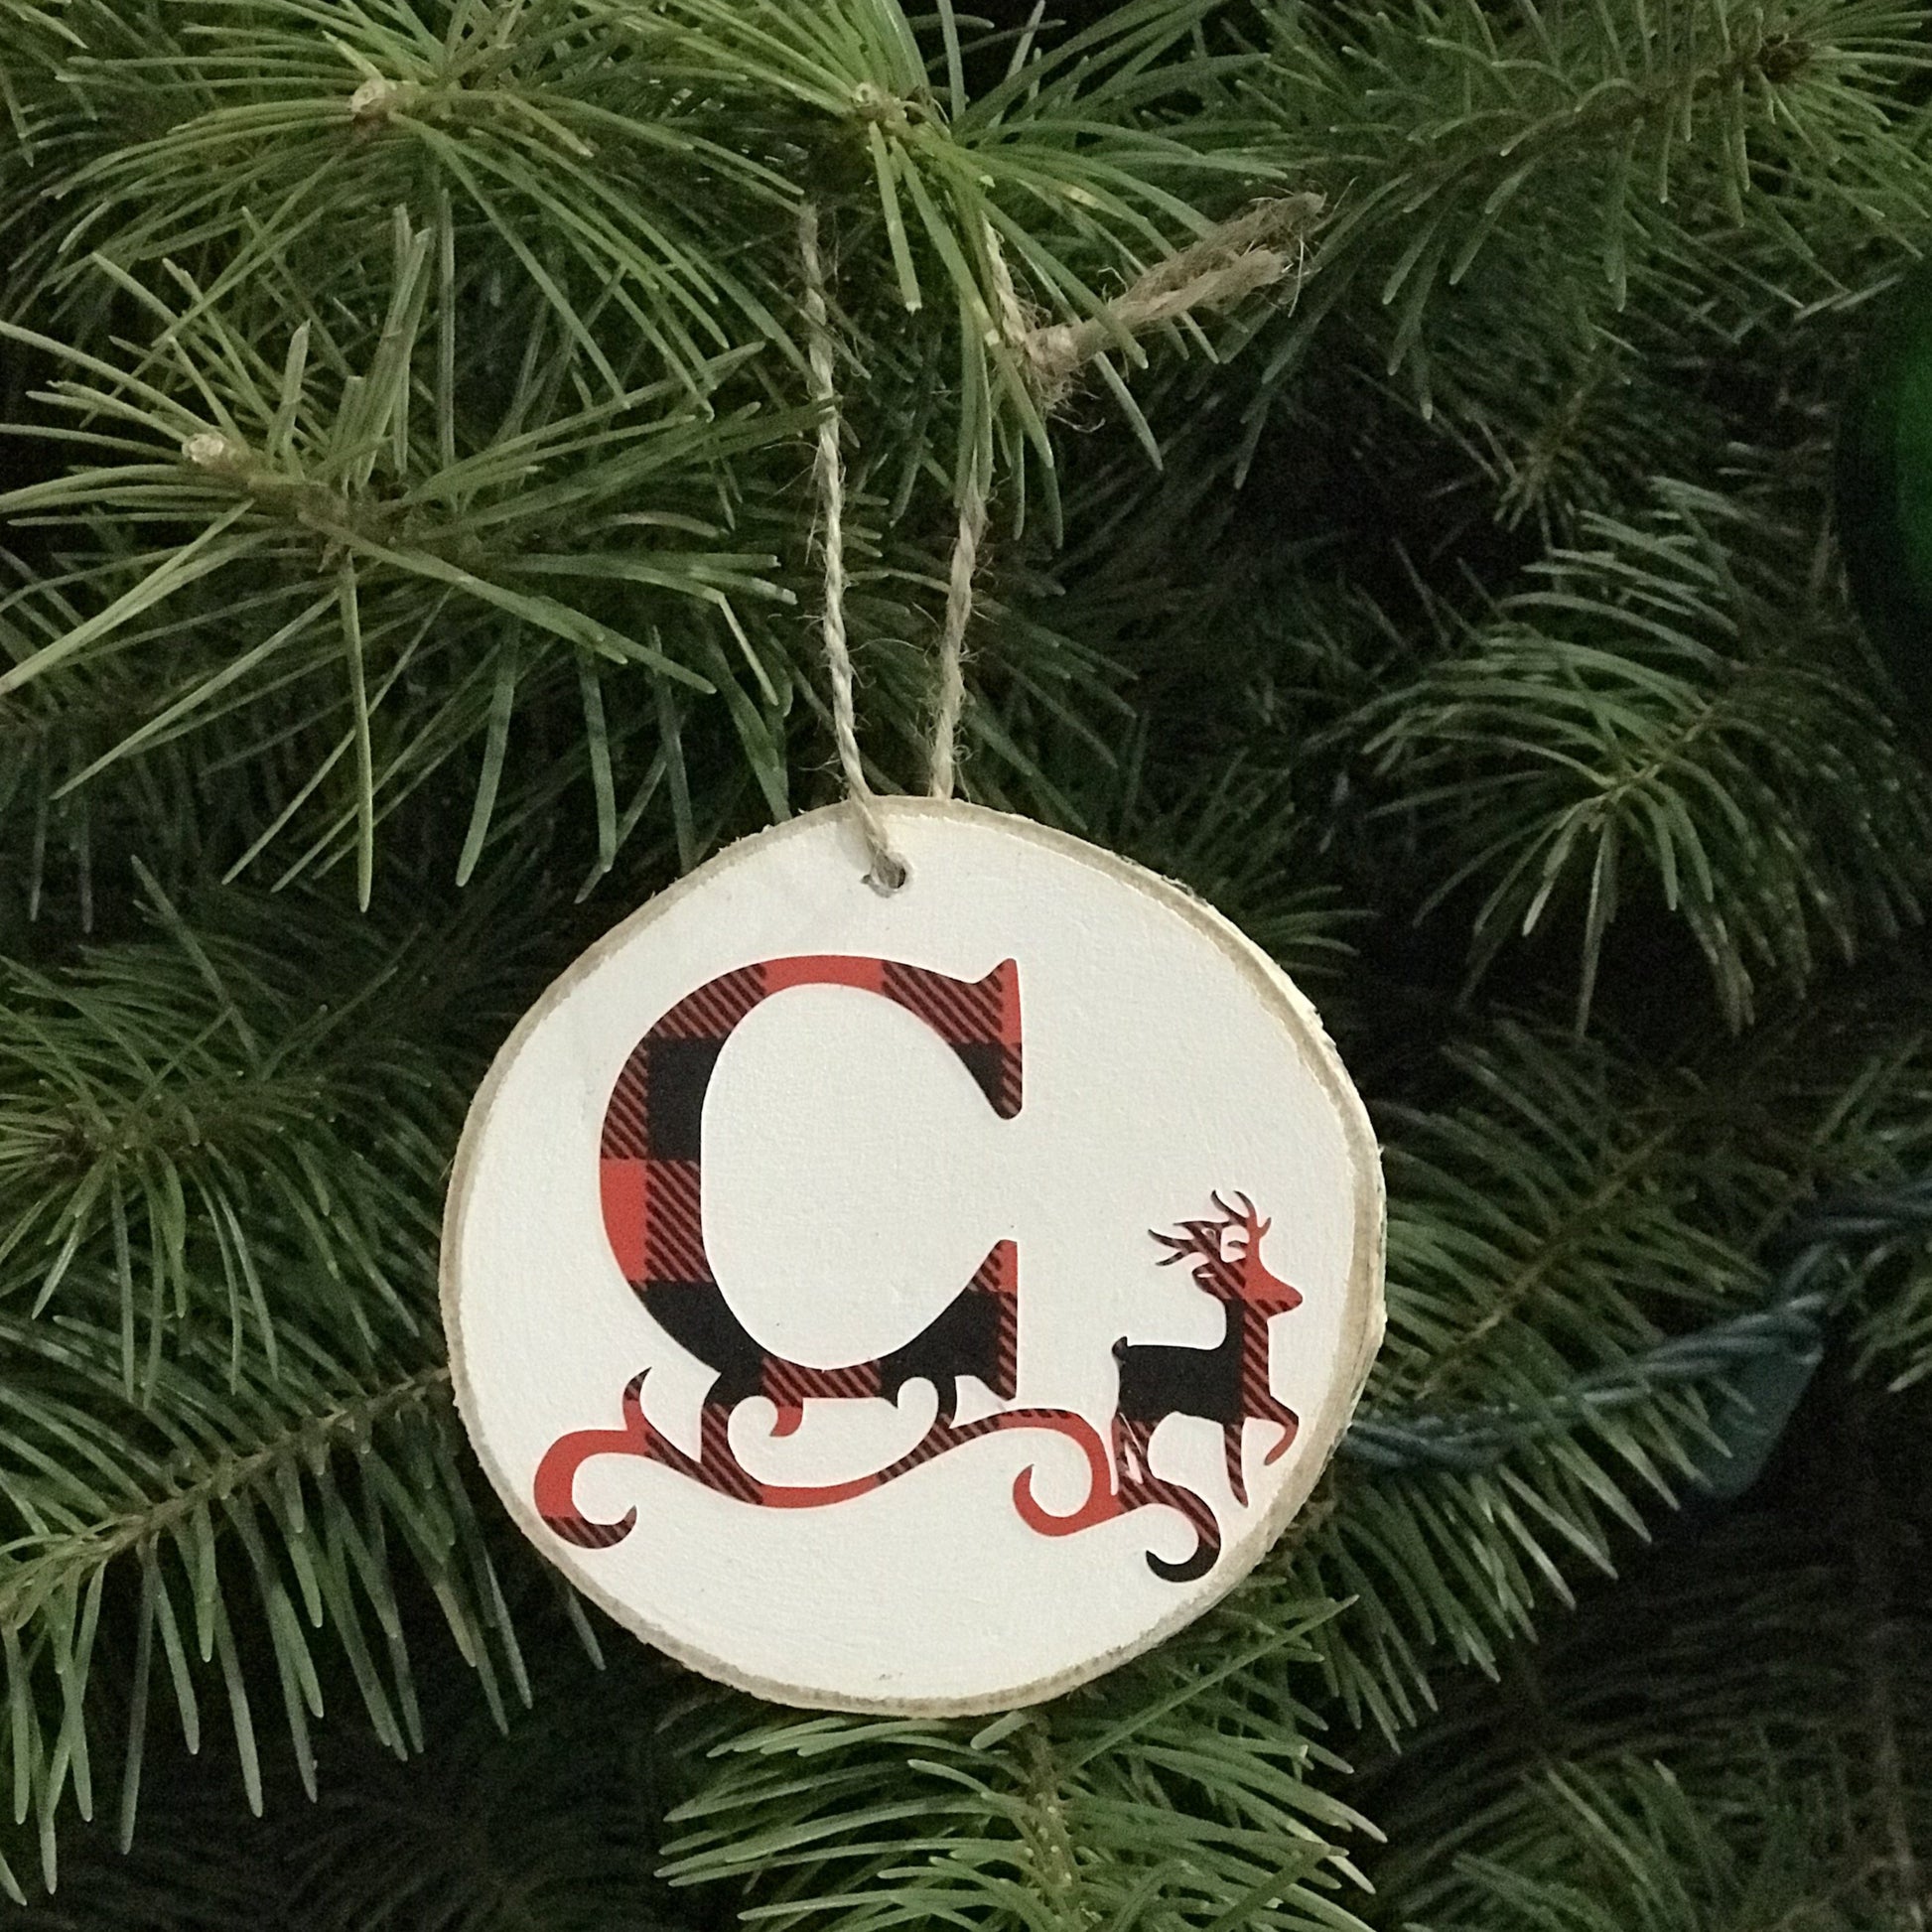 christmas ornament, wood slice, initial, letter ornament, buffalo plaid, red and black, name ornaments, reindeer, letter C